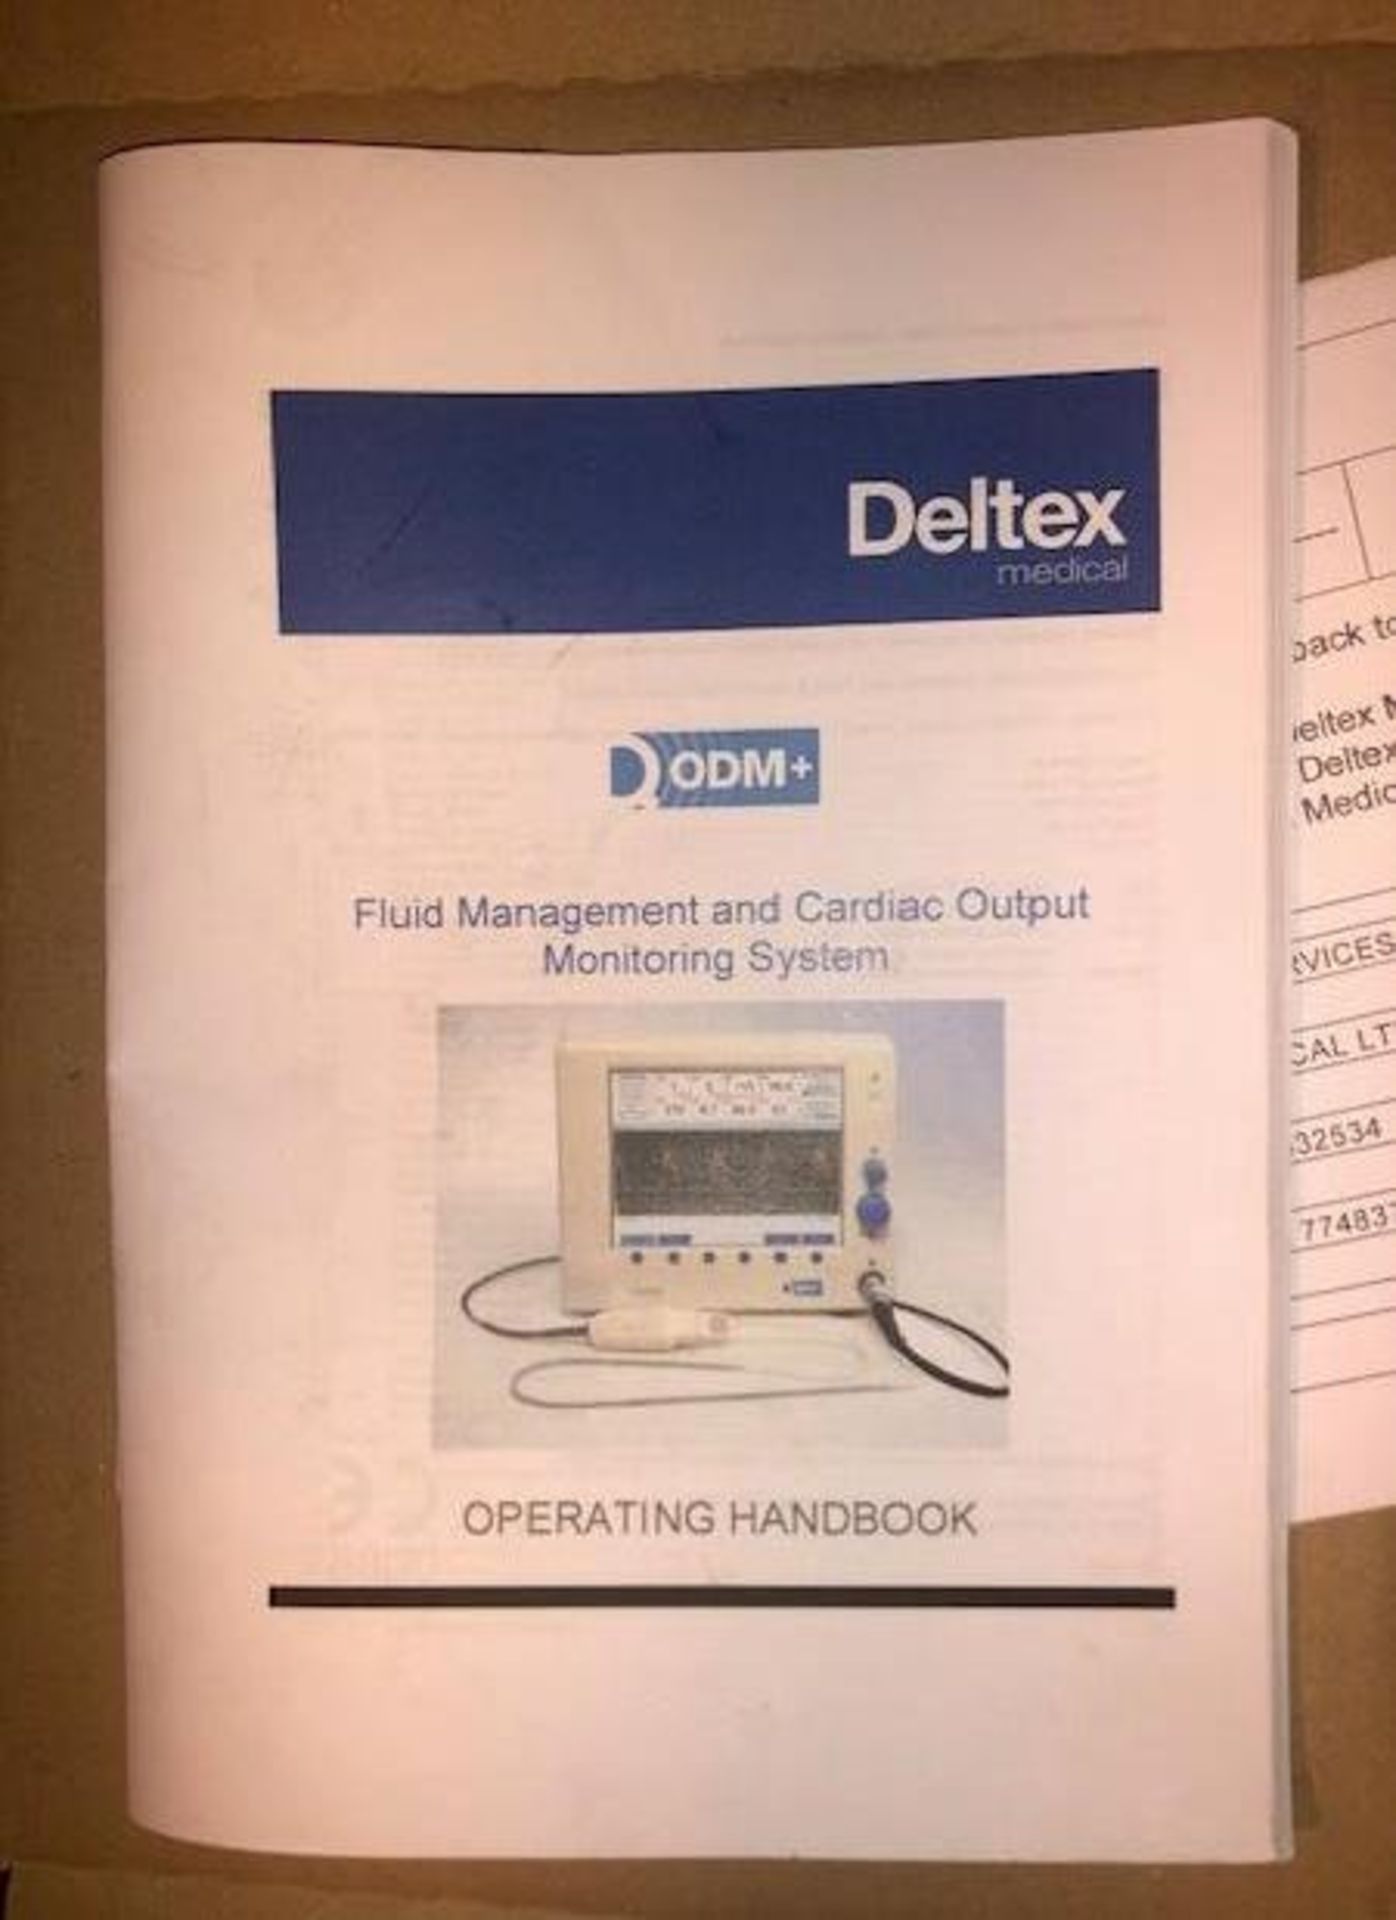 LOCATED AT NORMANTON - A Deltex CardioQ-ODM+ patient monitor - The worldâ€™s first fluid managem - Image 8 of 10